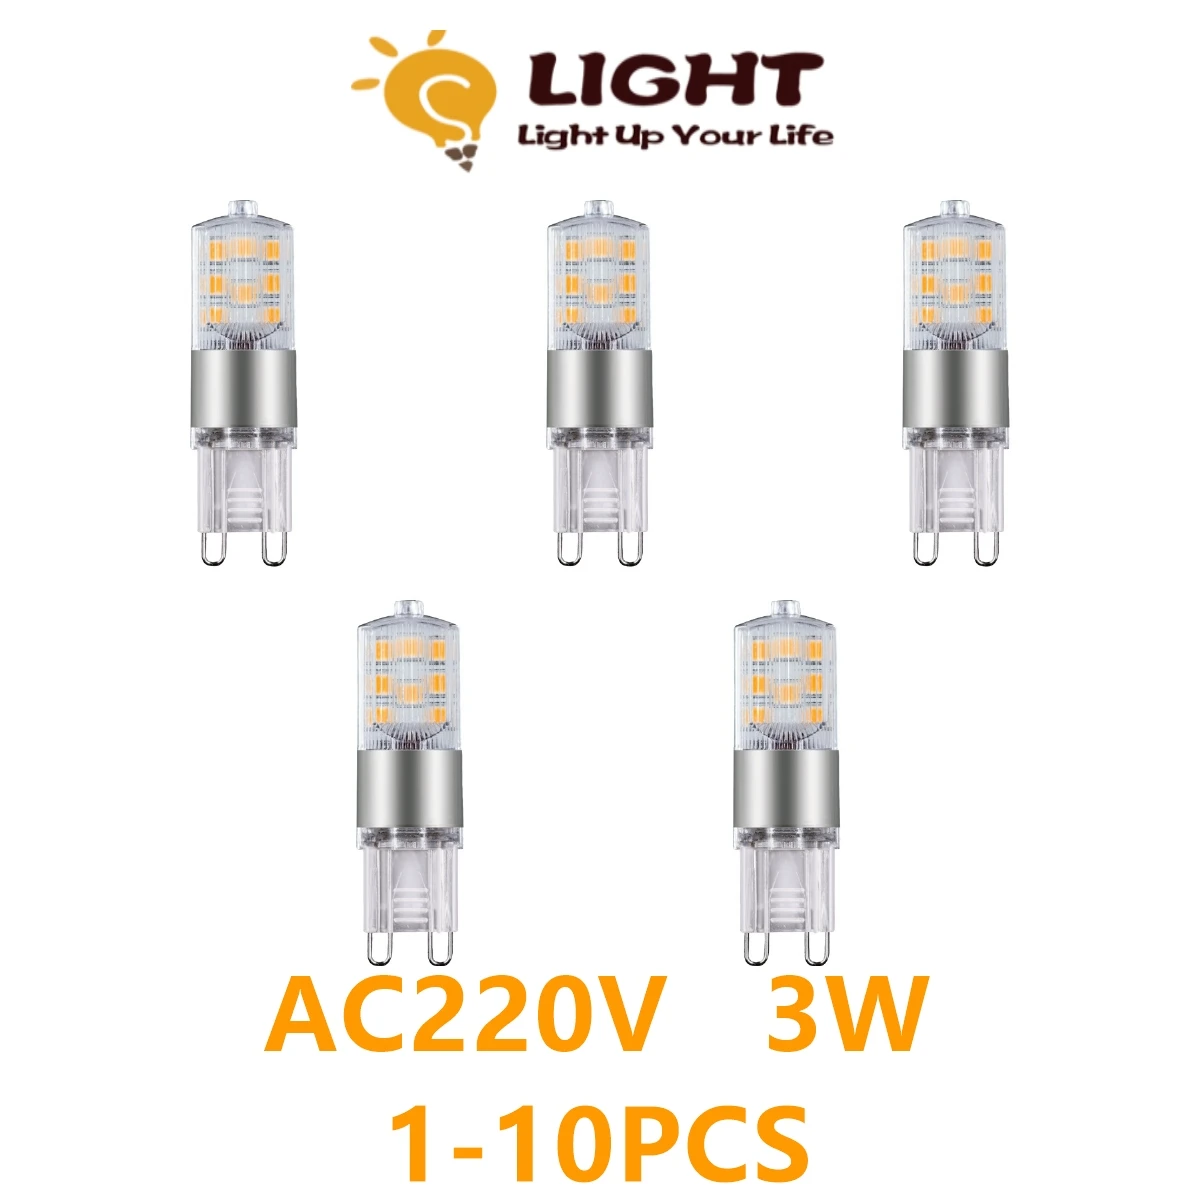 

LED G9 Corn lamp AC220V 3W non-strobe warm white light suitable for chandelier crystal lamp can replace 50 watt halogen lamp